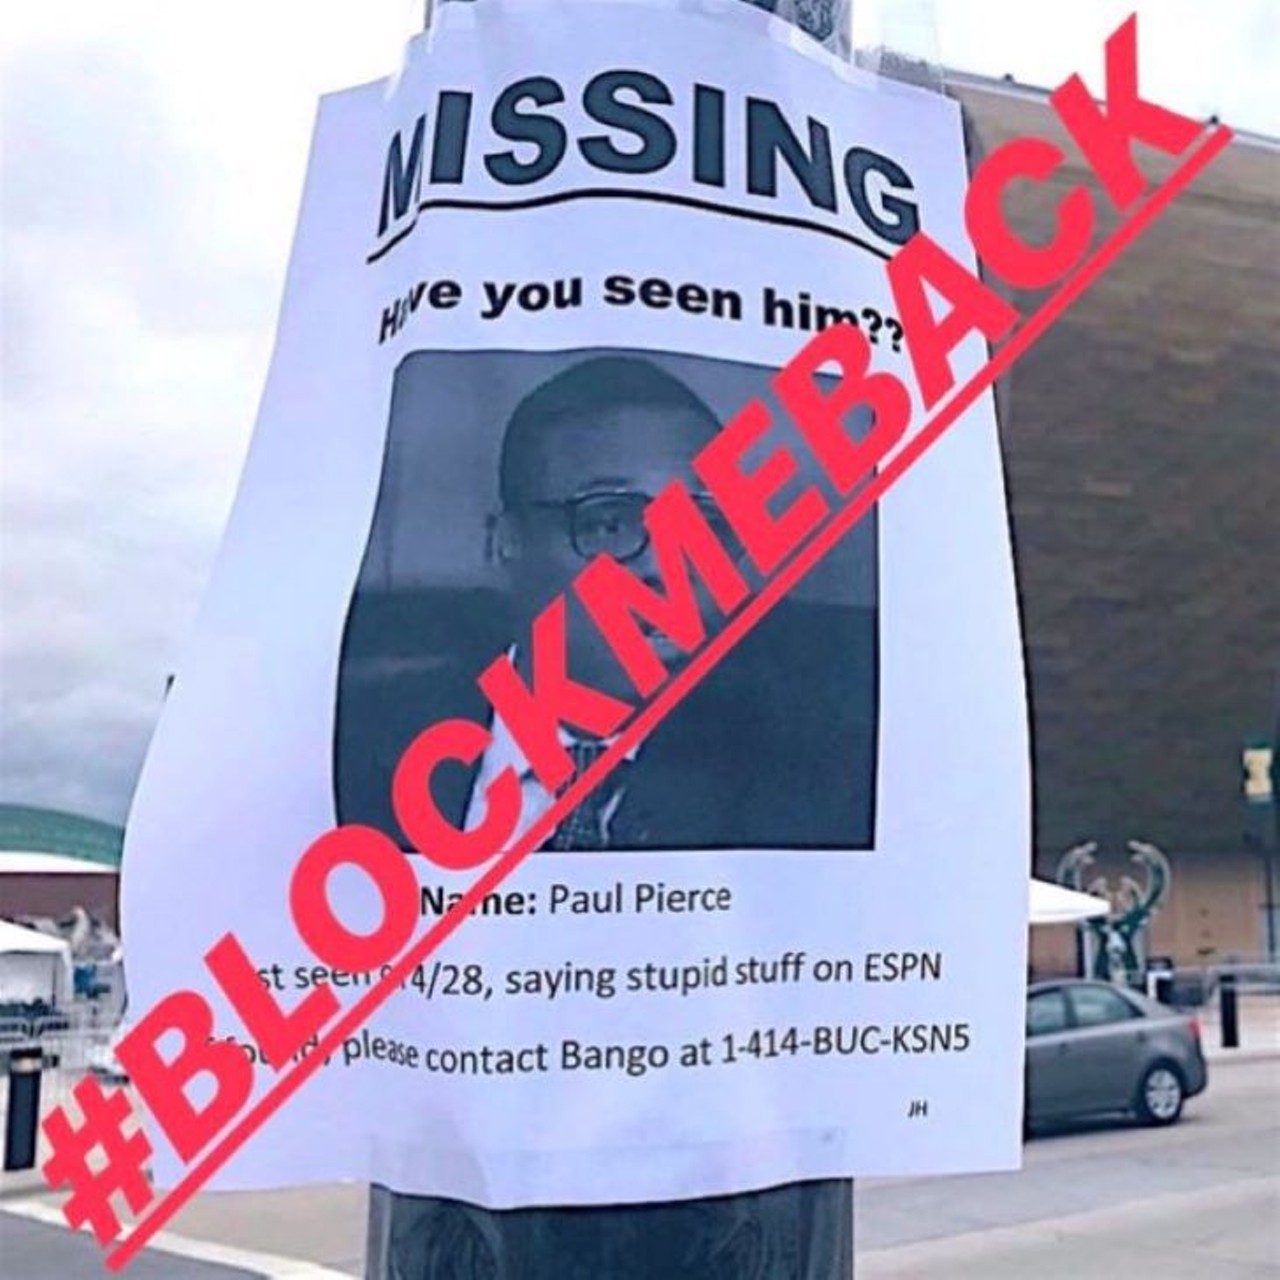 #BlockMeBack
The name of this one is apropos. Hosts trod through controversial topics and pitch unfiltered, unabashedly brash takes on everything from racial injustice to sports. Not for the faint-hearted, and certainly not for the P.C. police either.#BLOCKMEBACK on Apple Podcasts 
Photo via #BlockMeBack/Apple Podcasts